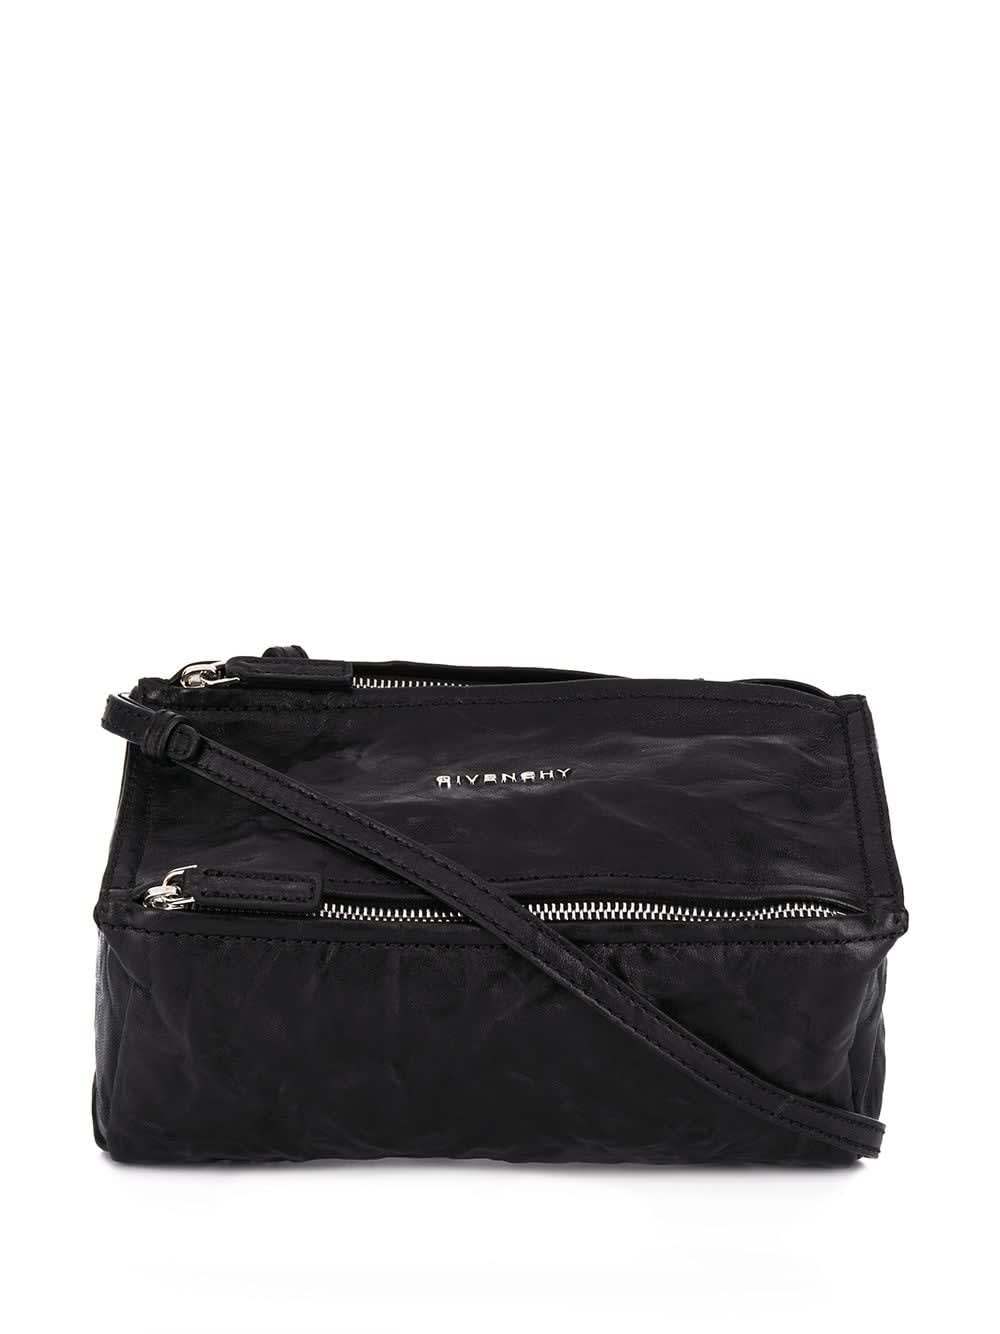 GIVENCHY PANDORA MINI BAG IN AGED BLACK LEATHER,BB05253004 001